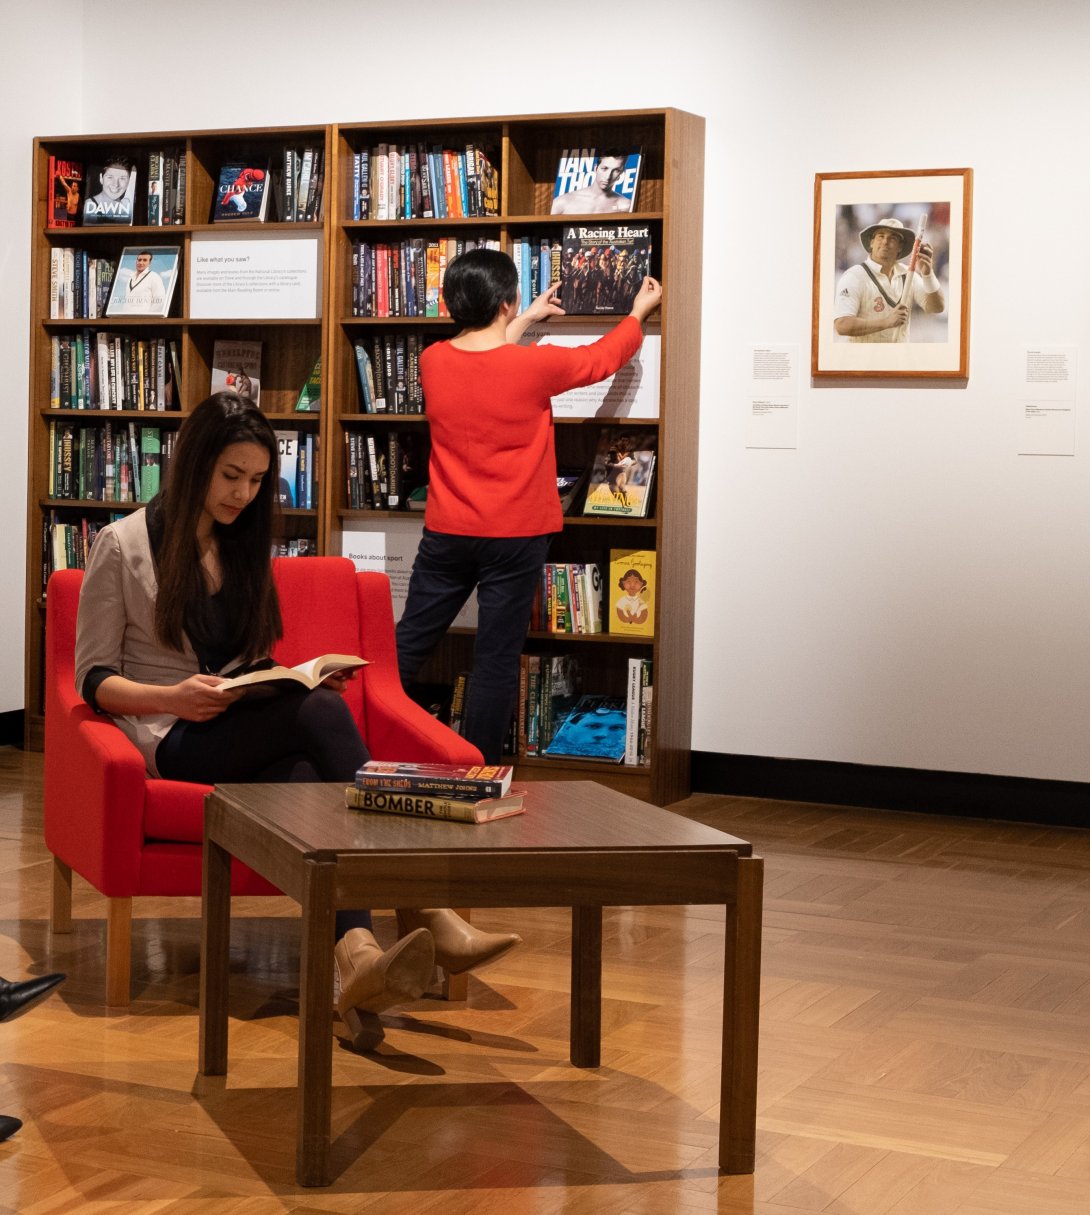 Woman sitting on a red armchair reading in front of large bookshelf with another woman looking at a book placed on the shelf beside a framed image of Shane Warne